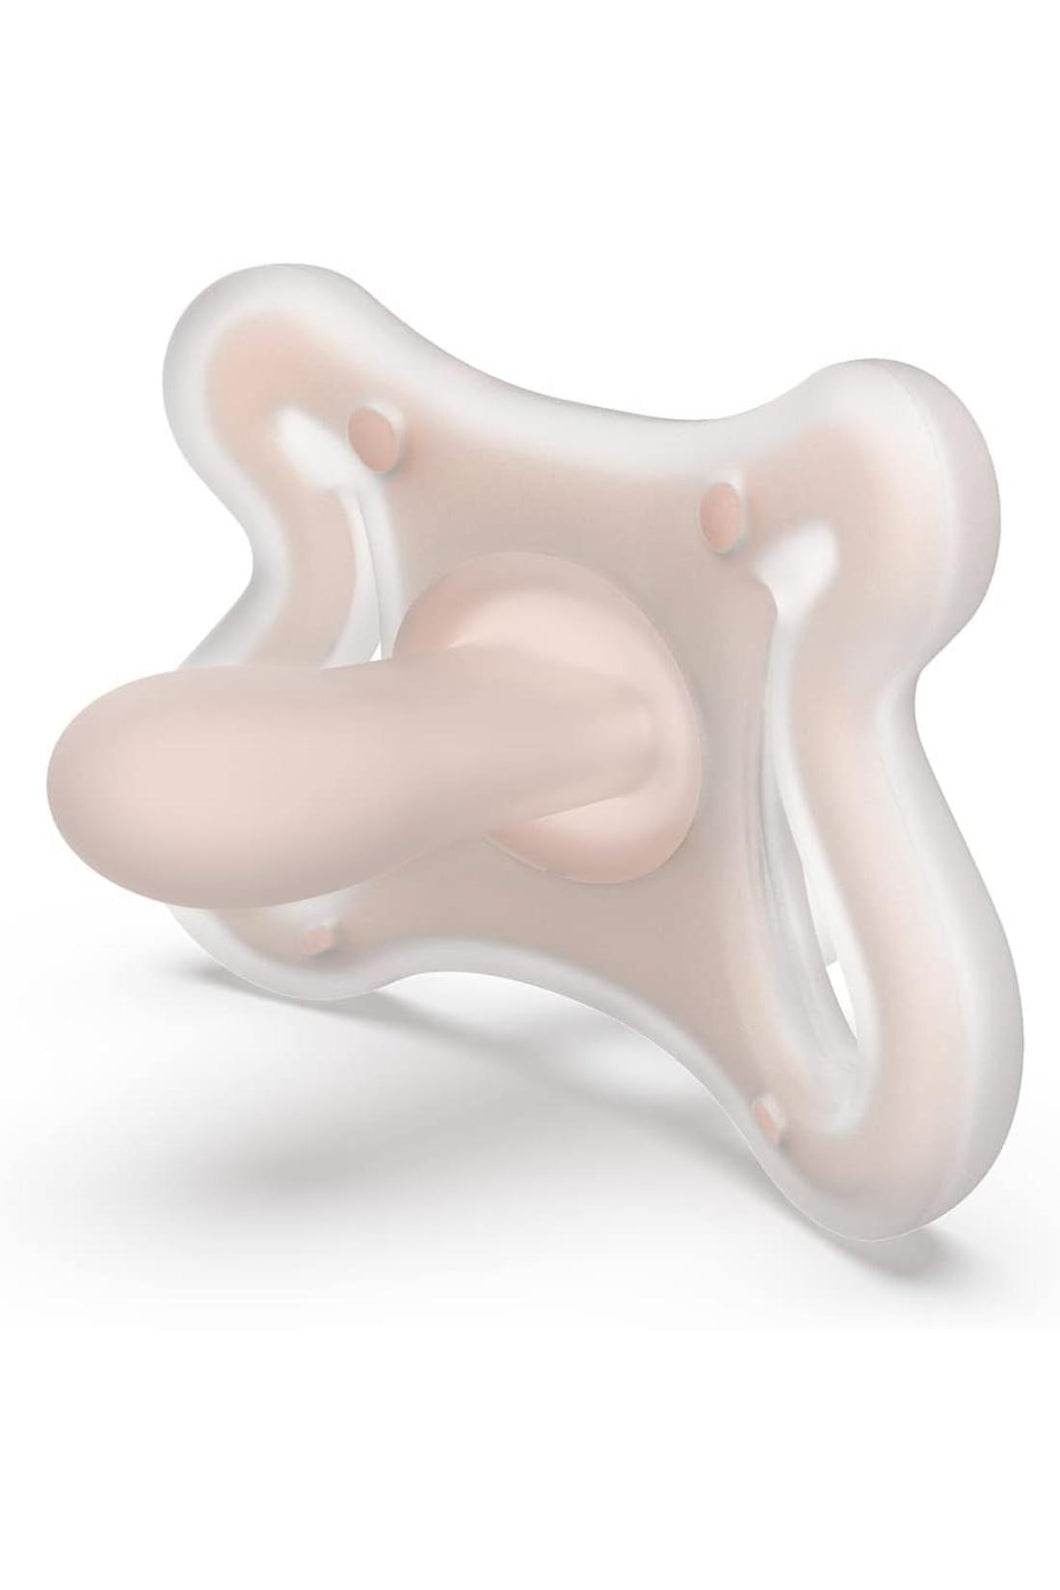 Suavinex Zero Zero Physiological Air-flow Silicone Soother 0-6M